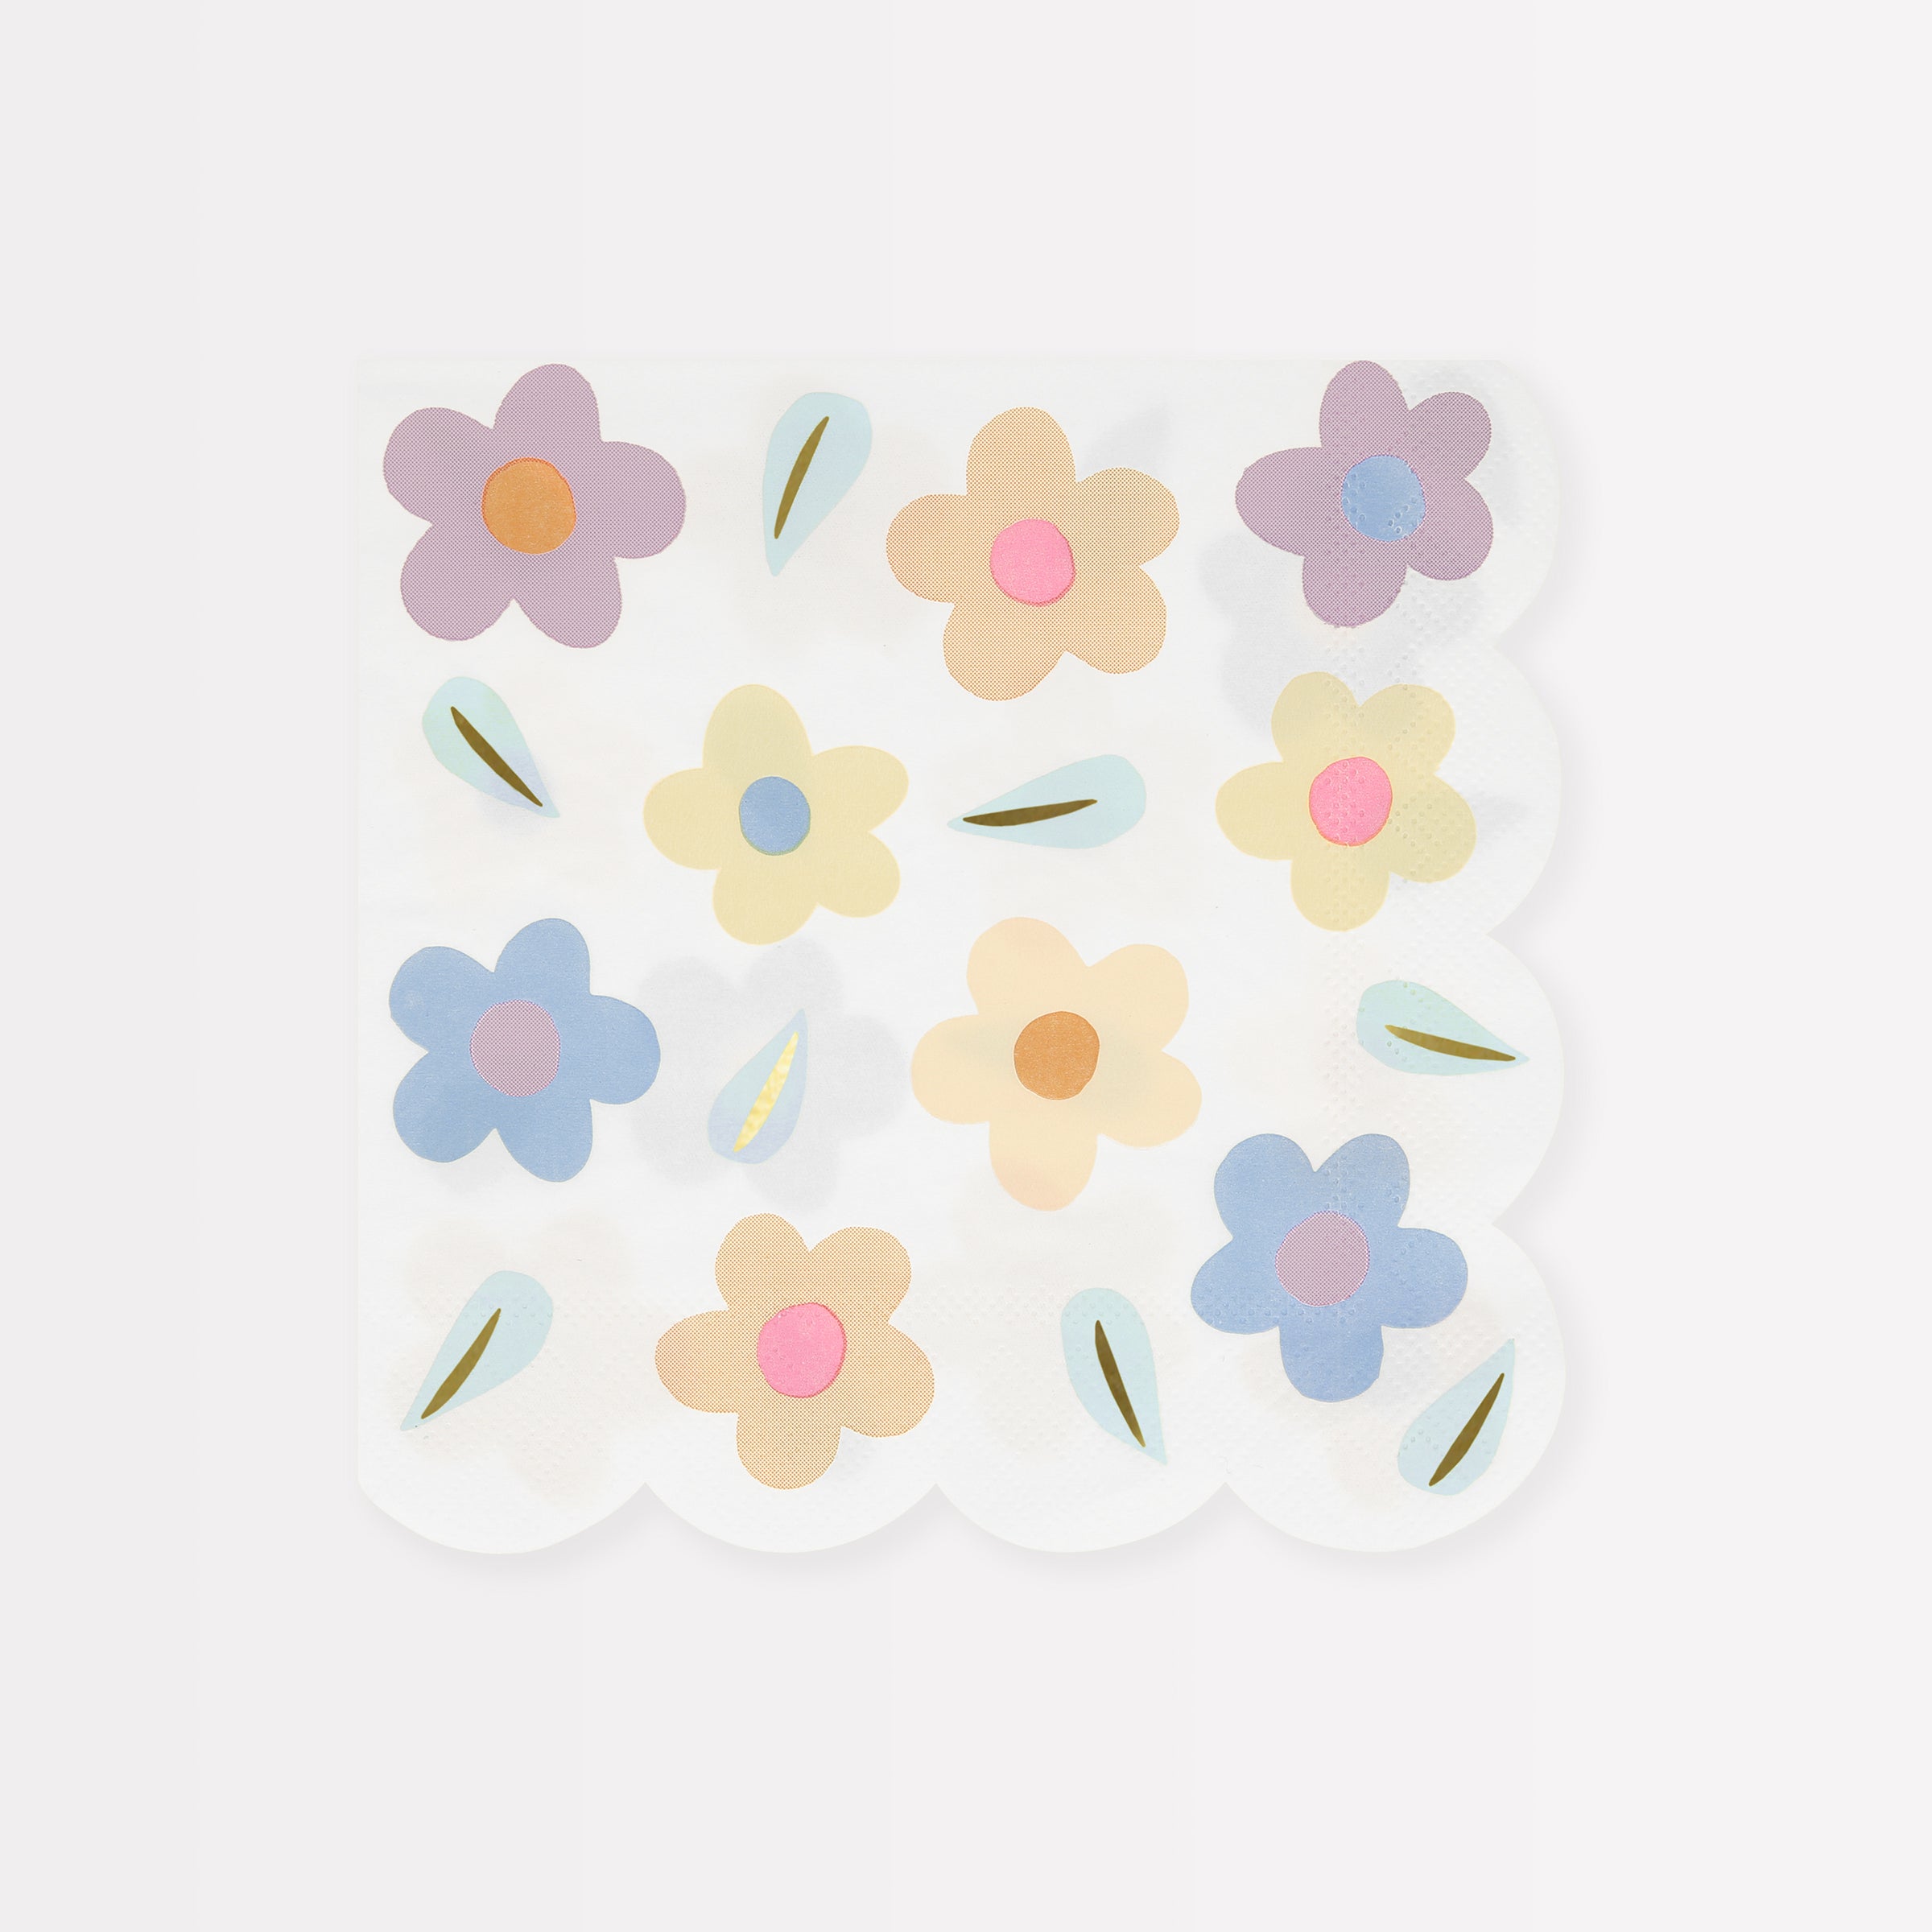 Our paper napkins, featuring on-trend pastel flowers, are perfect for garden parties or picnics.